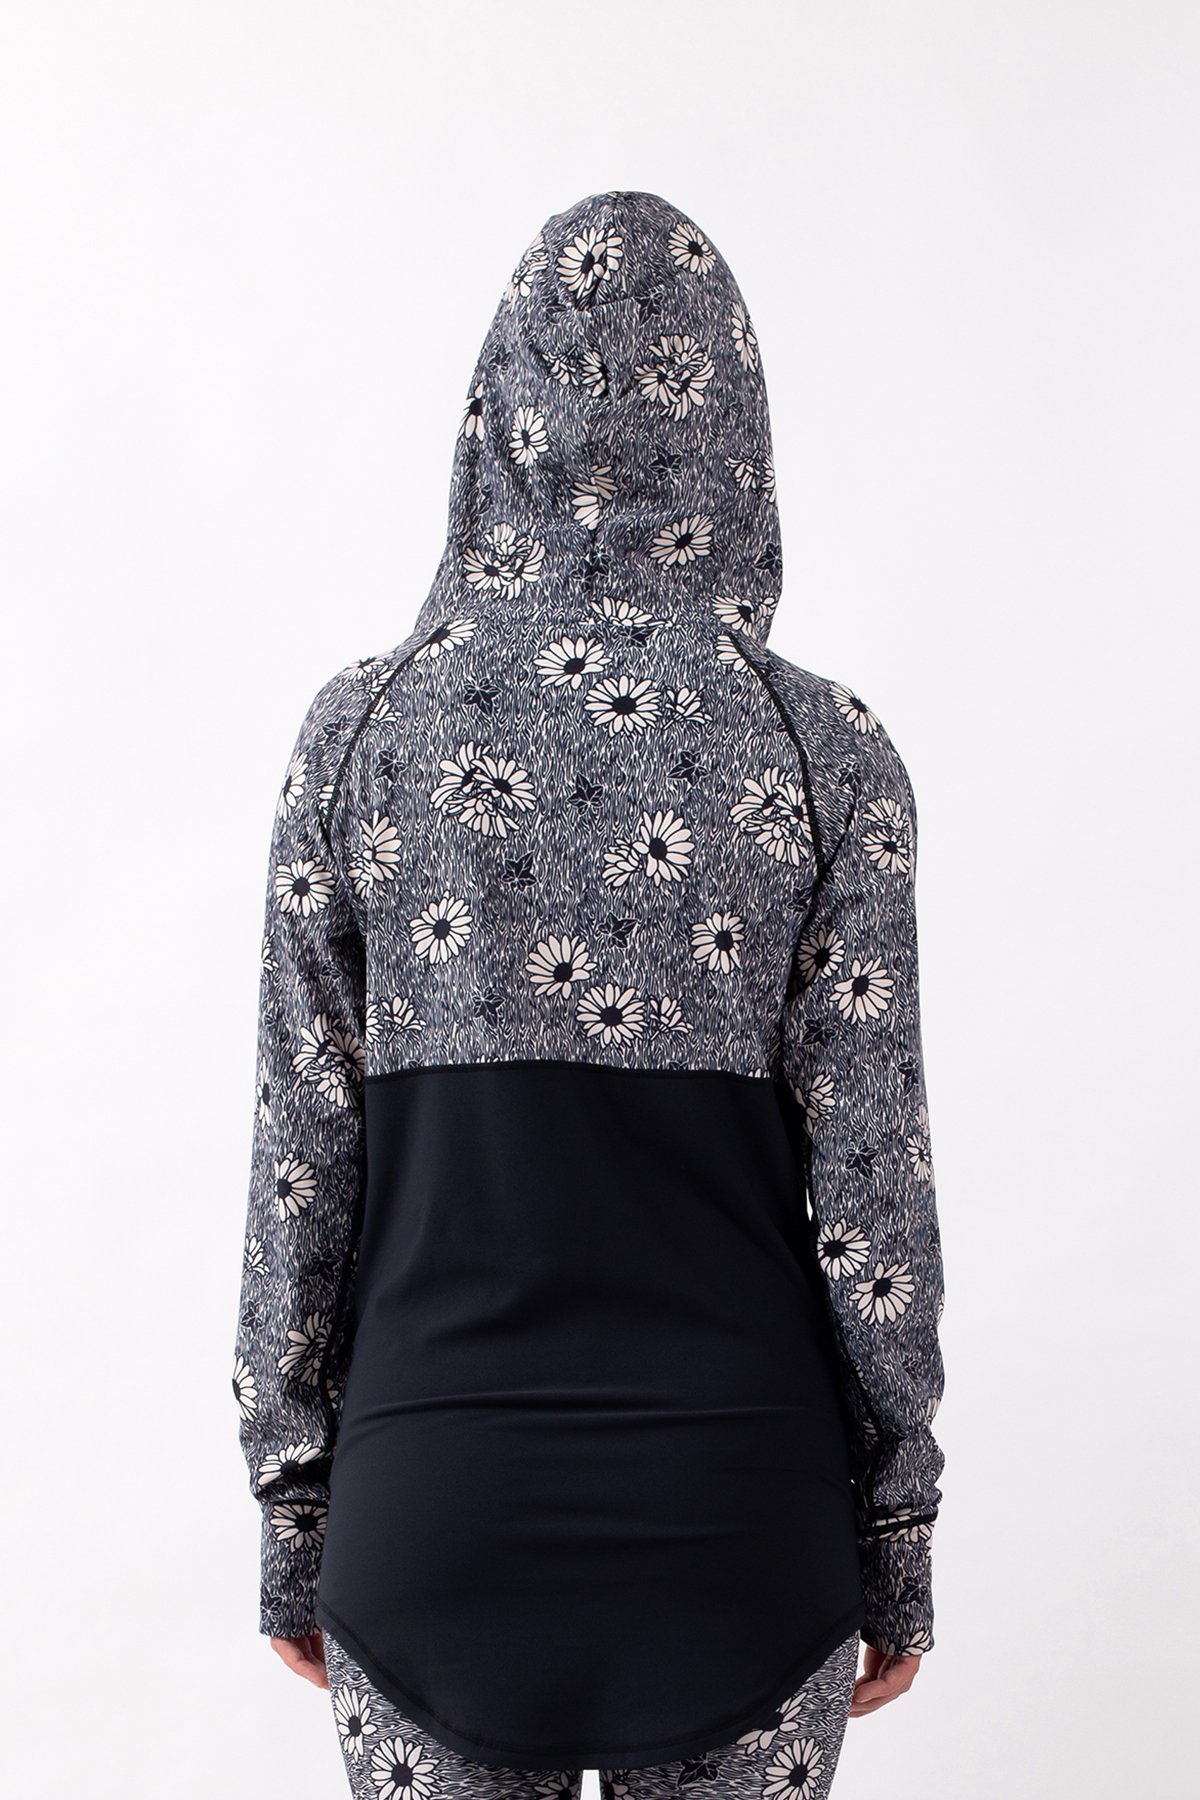 Base Layer | Icecold Hoodie Top - Ivy Blossom | M